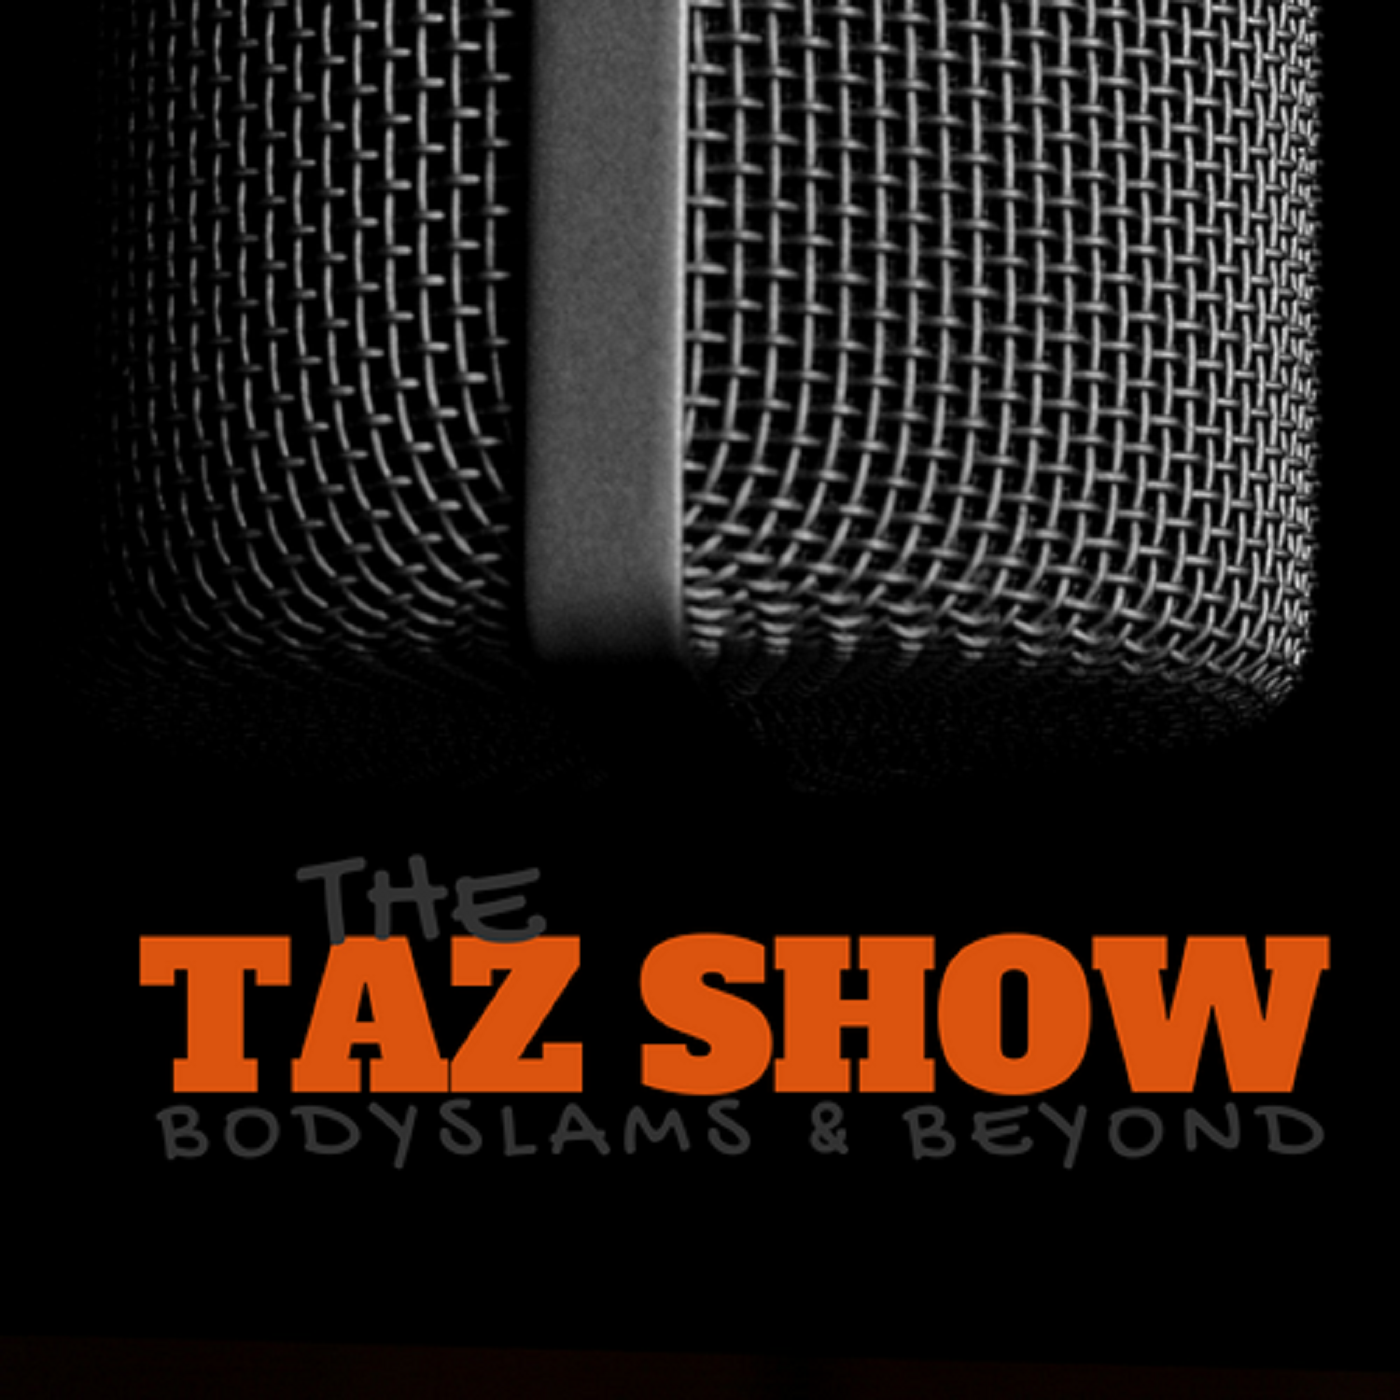 Hump Day Promos on The Taz Show!